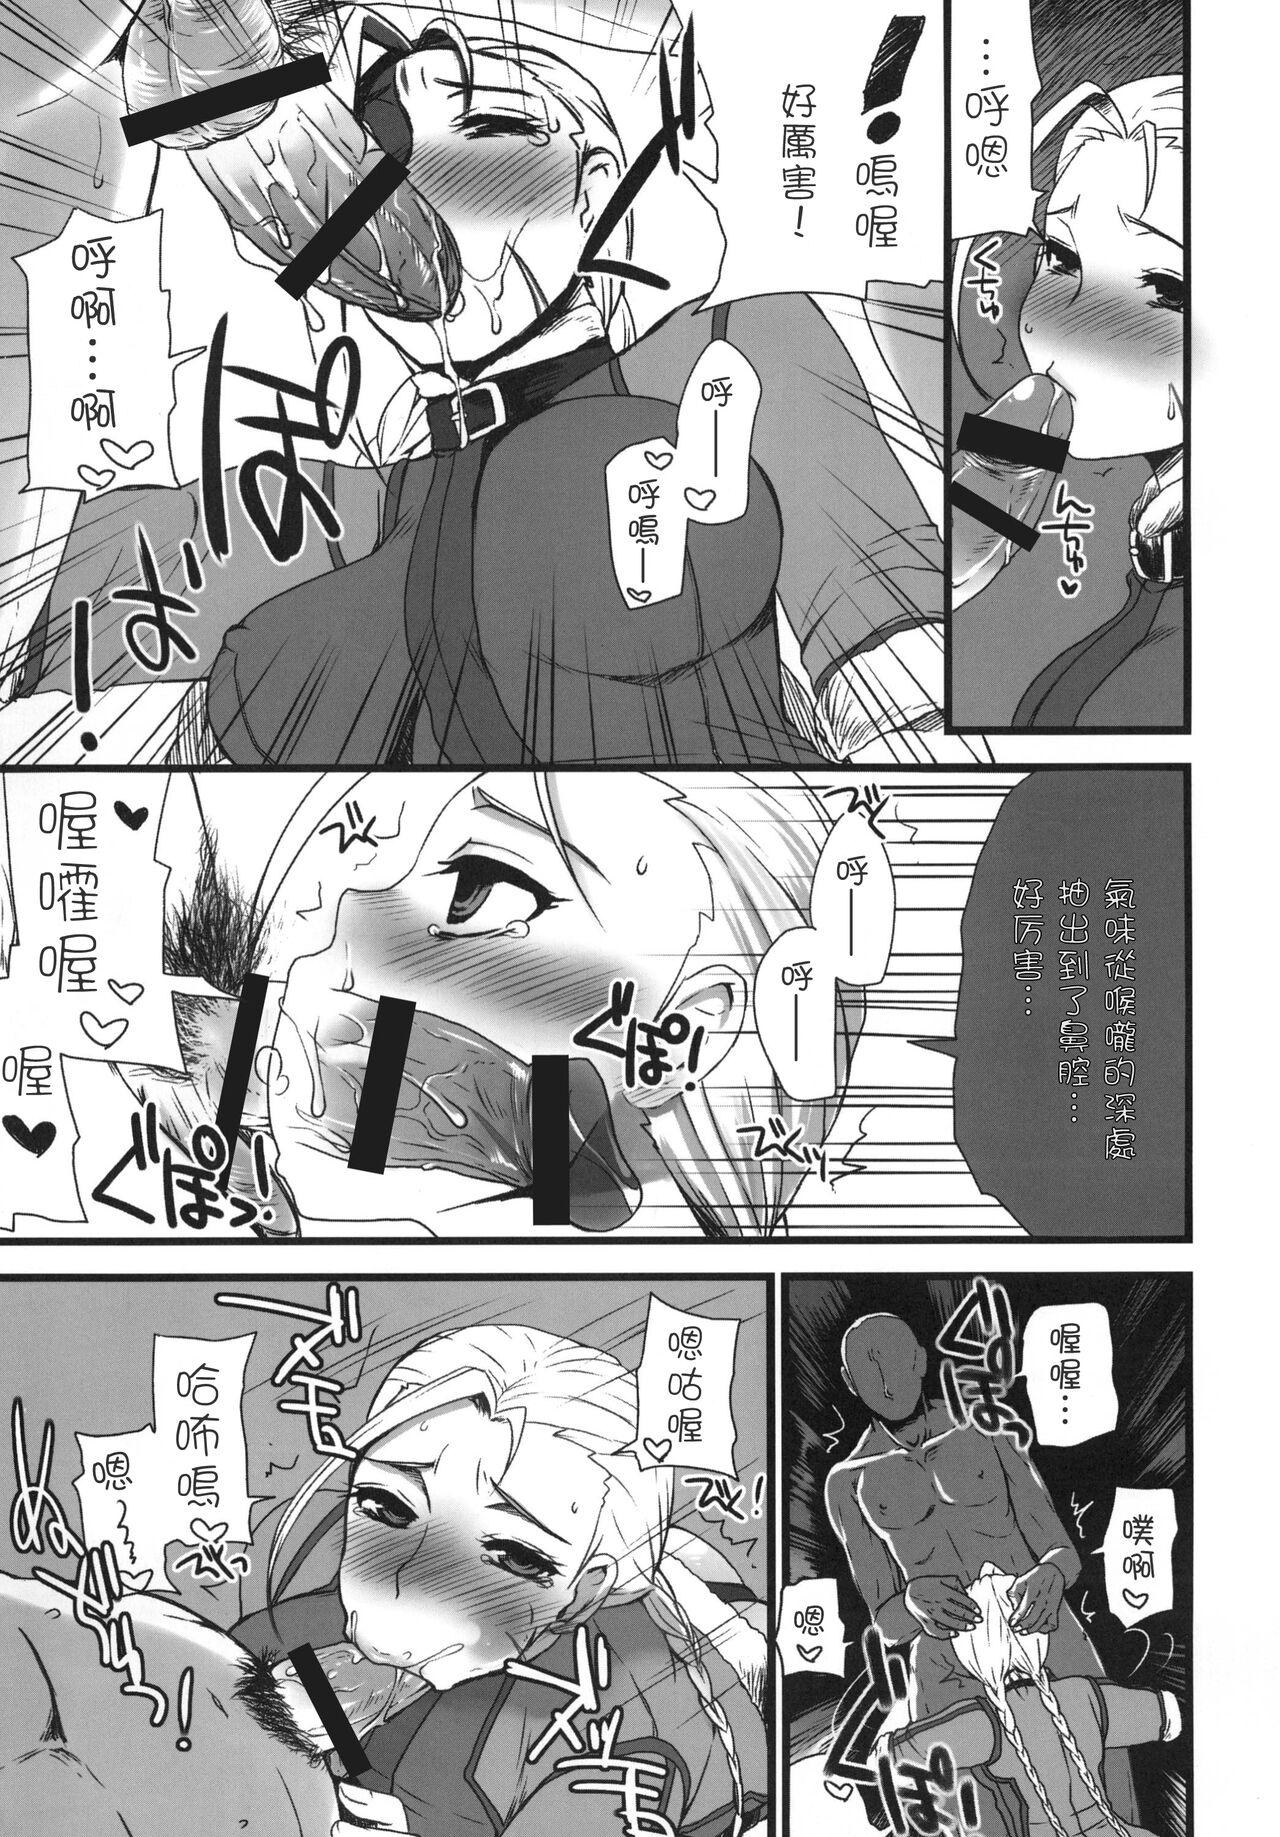 Oral Porn Mona-Lisa Overdrive | 重啟蒙娜麗莎 - Street fighter Shemale Porn - Page 7